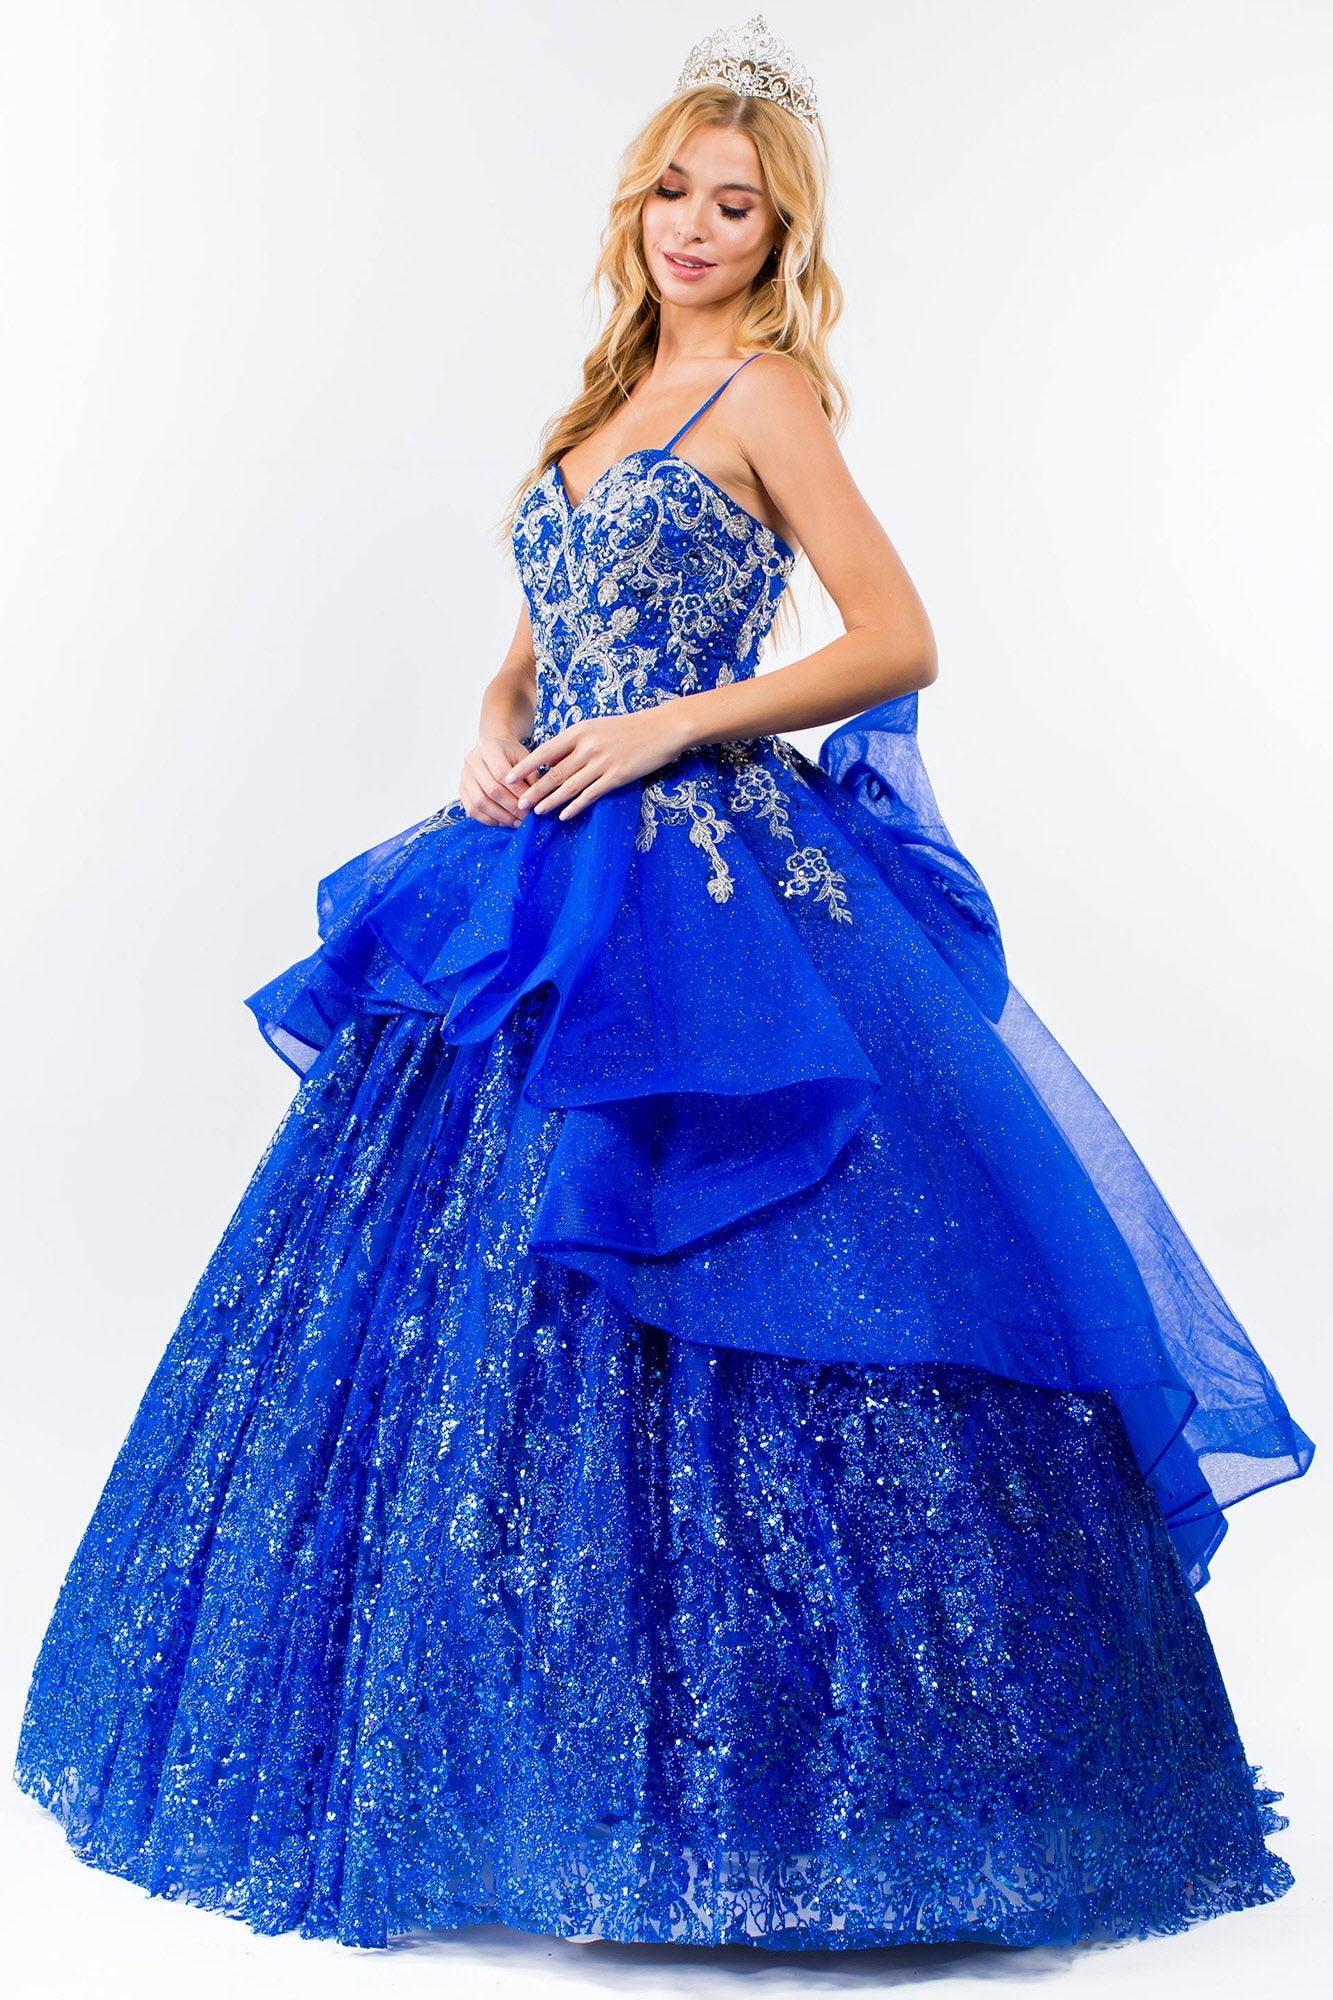 Quinceanera Spaghetti Strap Long Dress - The Dress Outlet